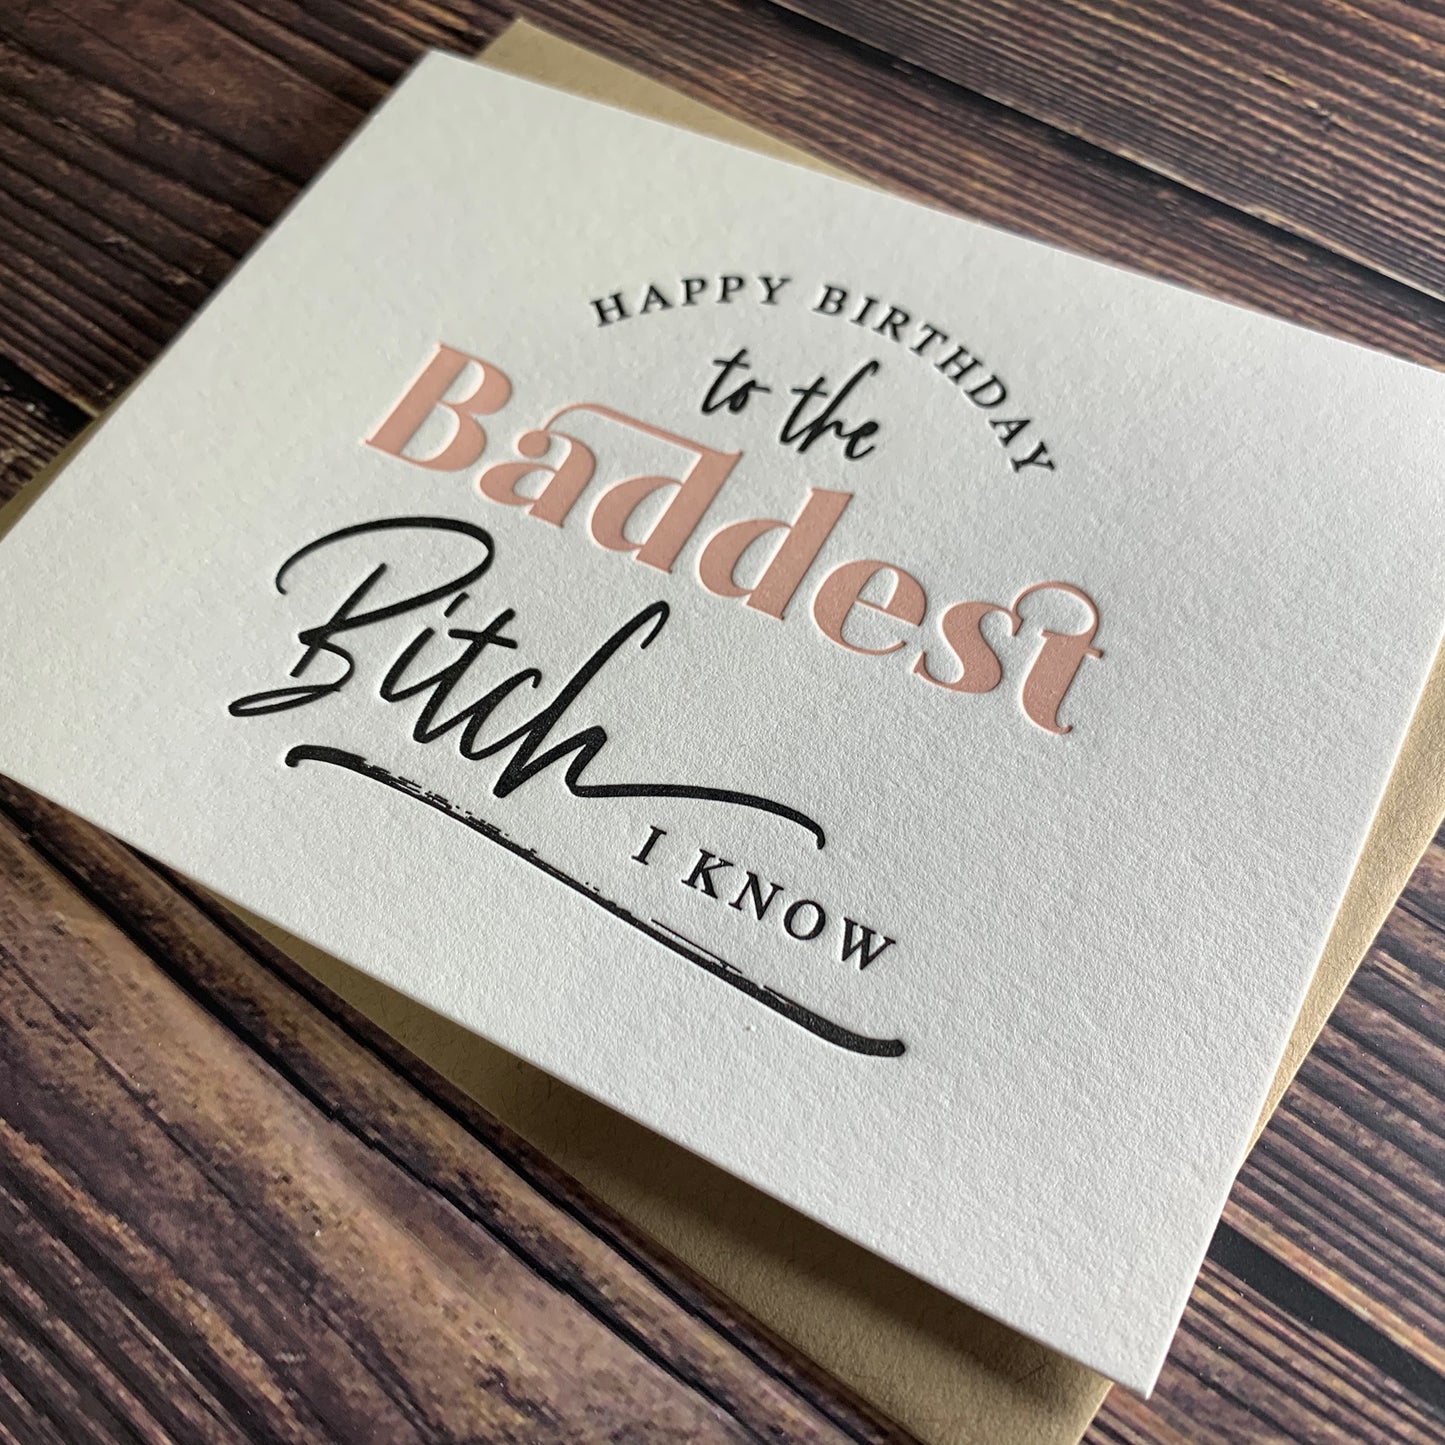 Happy Birthday to the Baddest Bitch I know, Birthday Card, Letterpress printed, view shows letterpress impression, includes envelope